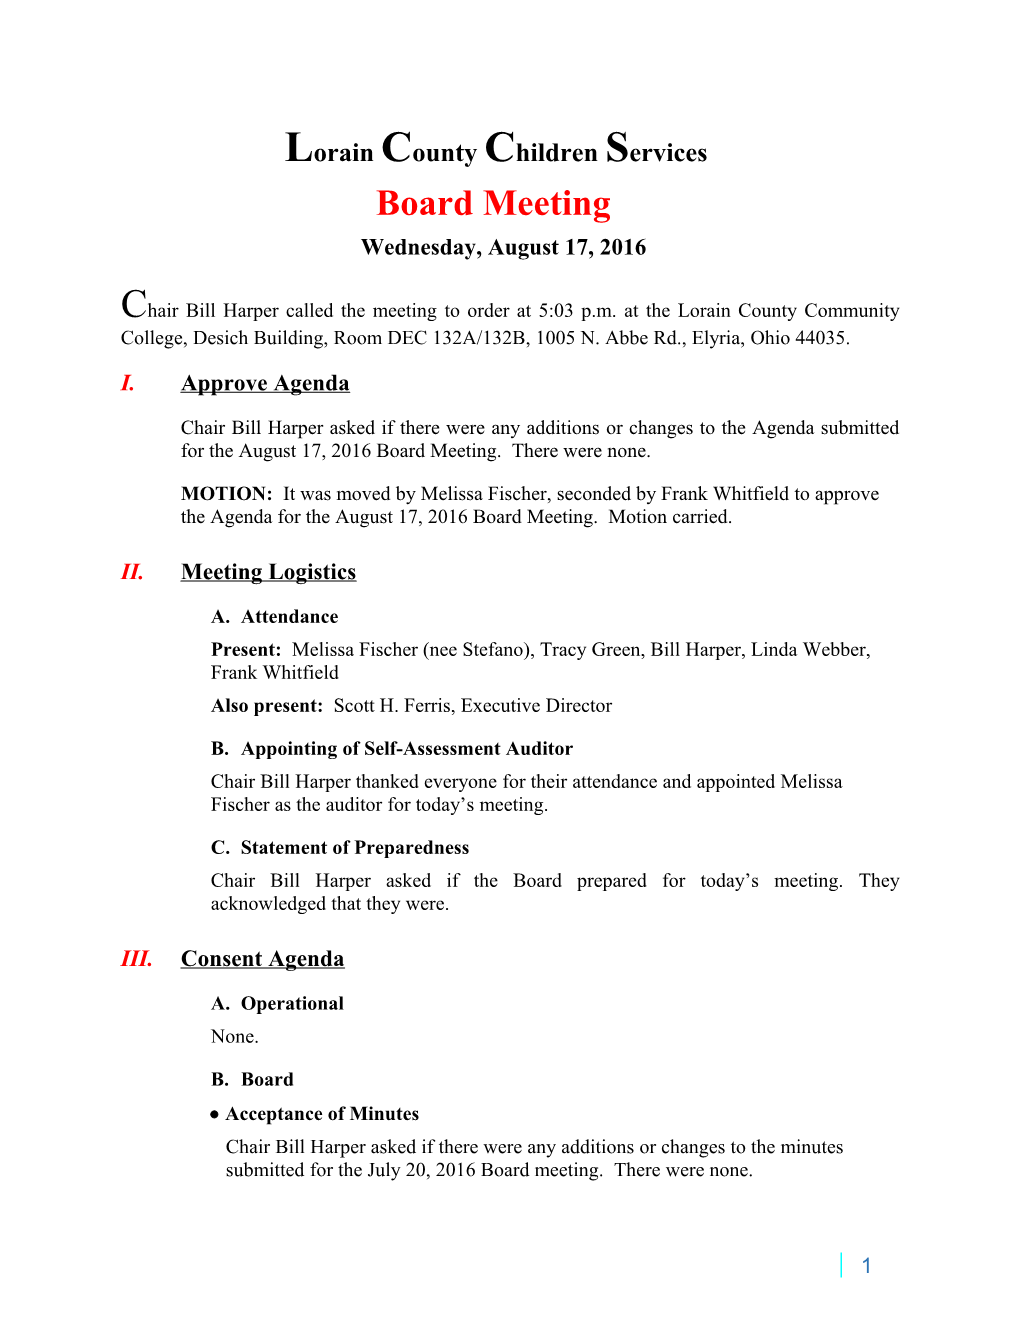 Lorain County Children Services Board Meeting